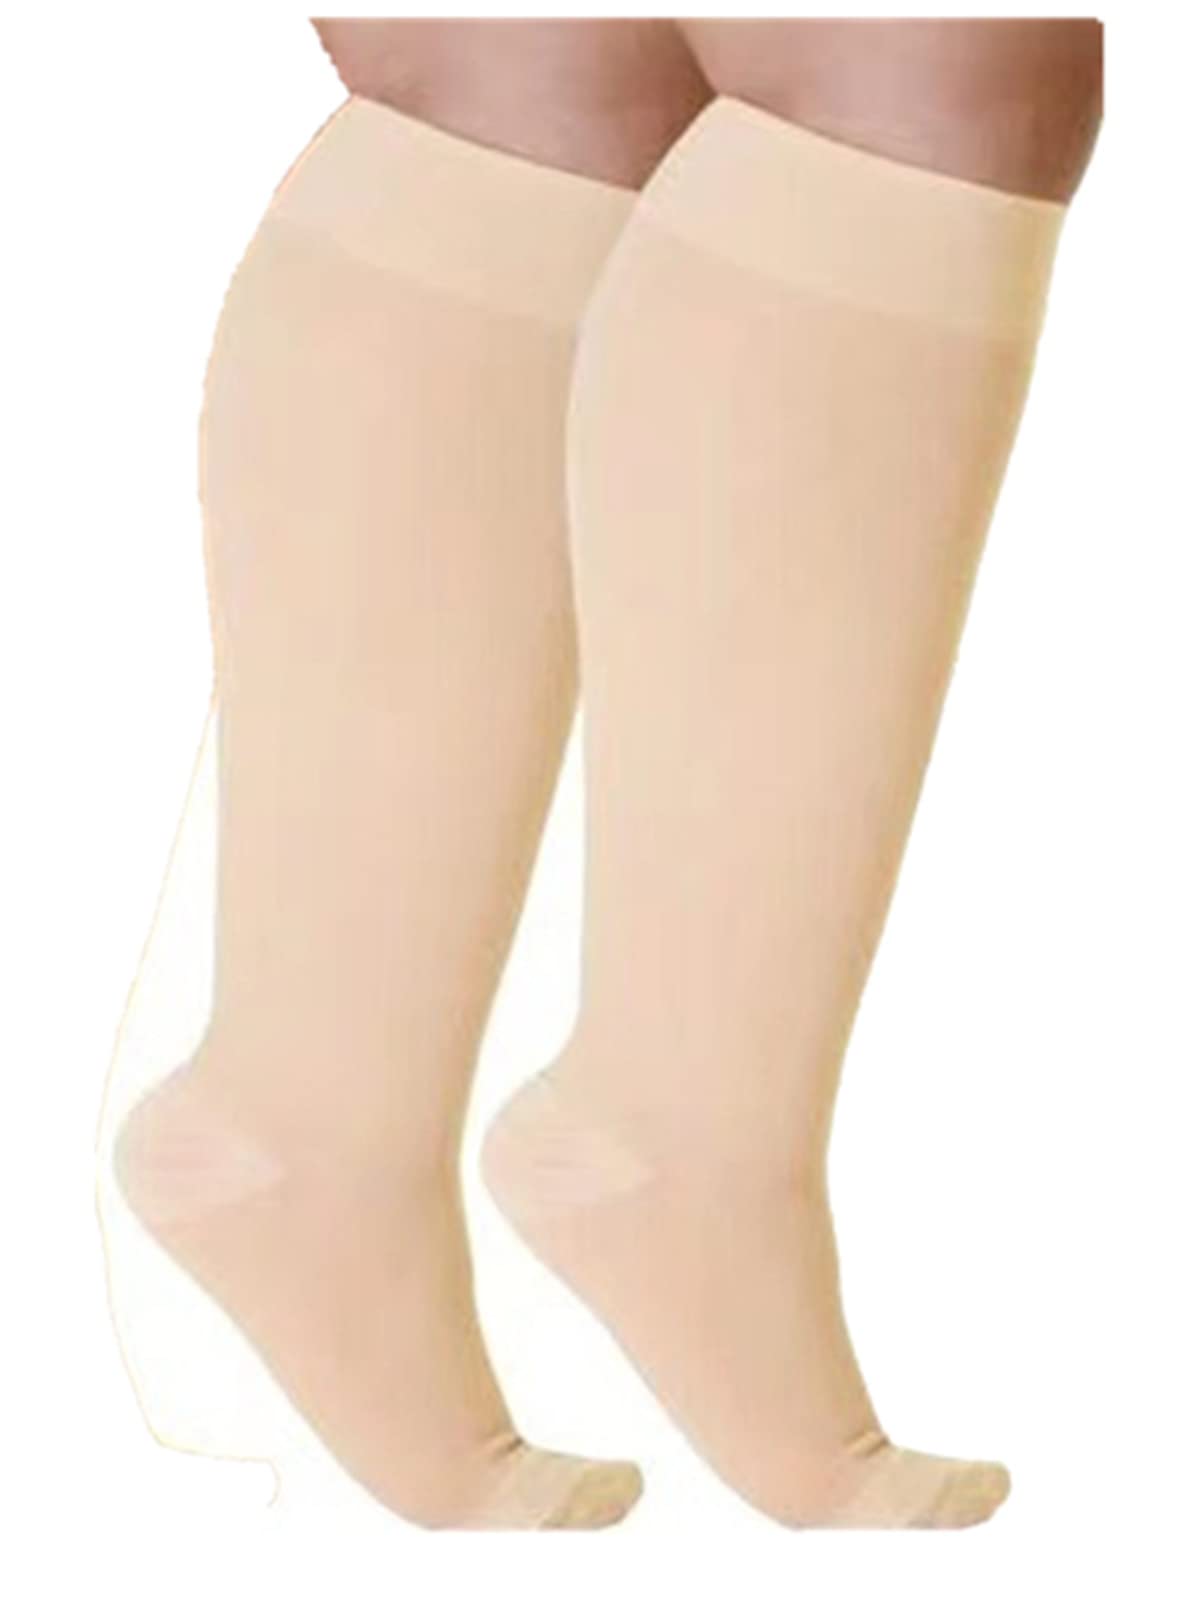 FitLegs - Open-Toe Compression Stocking - 18mmHg AES DVT